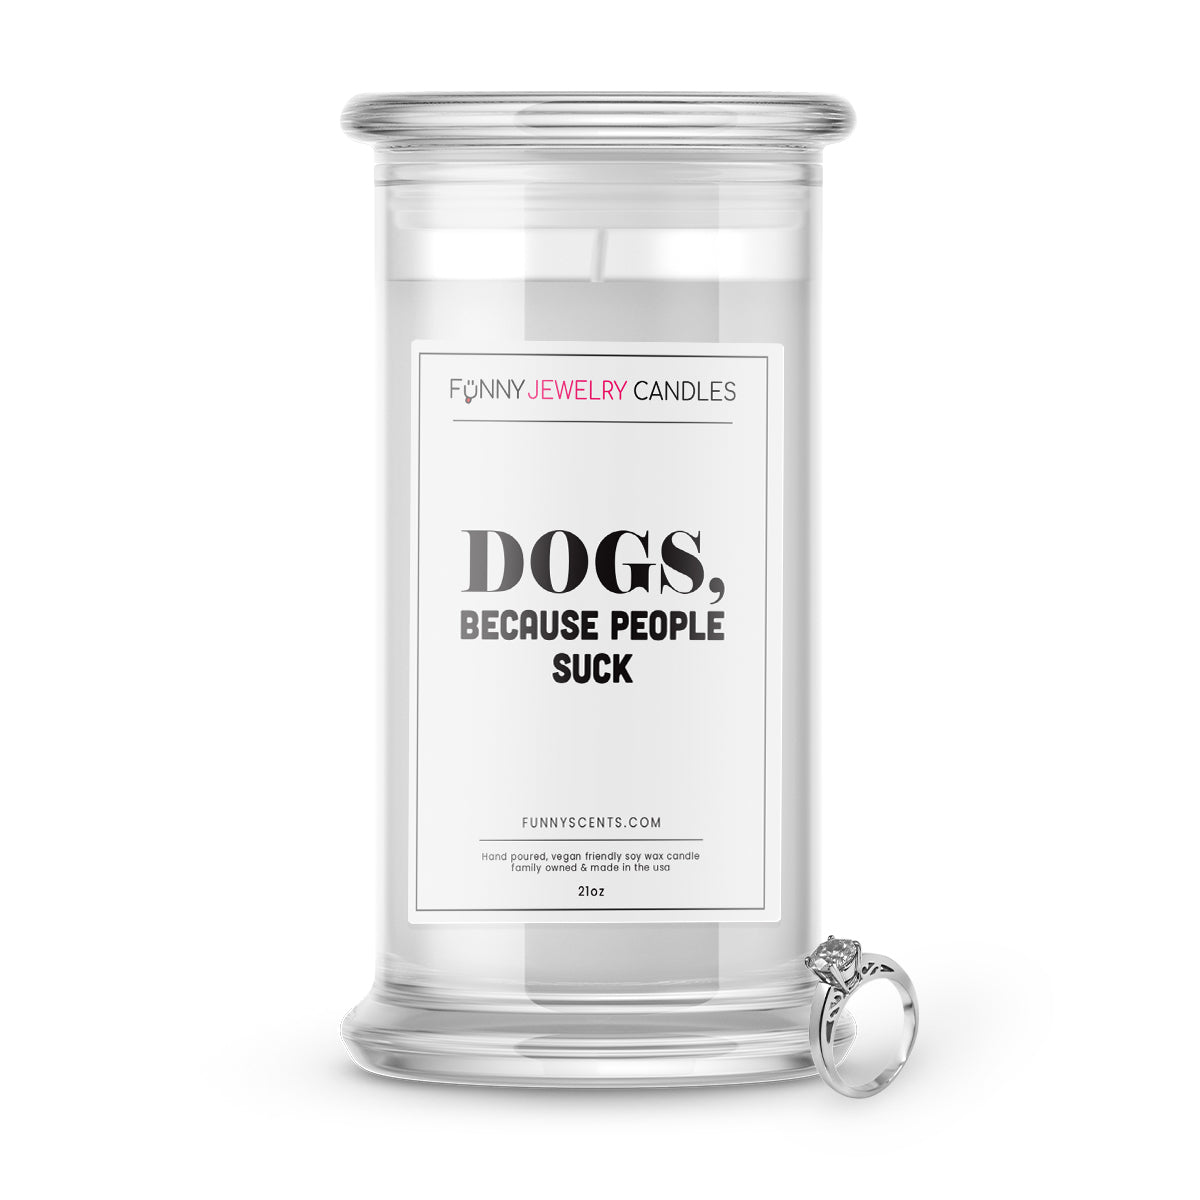 Dogs, Because People Suck Jewelry Funny Candles